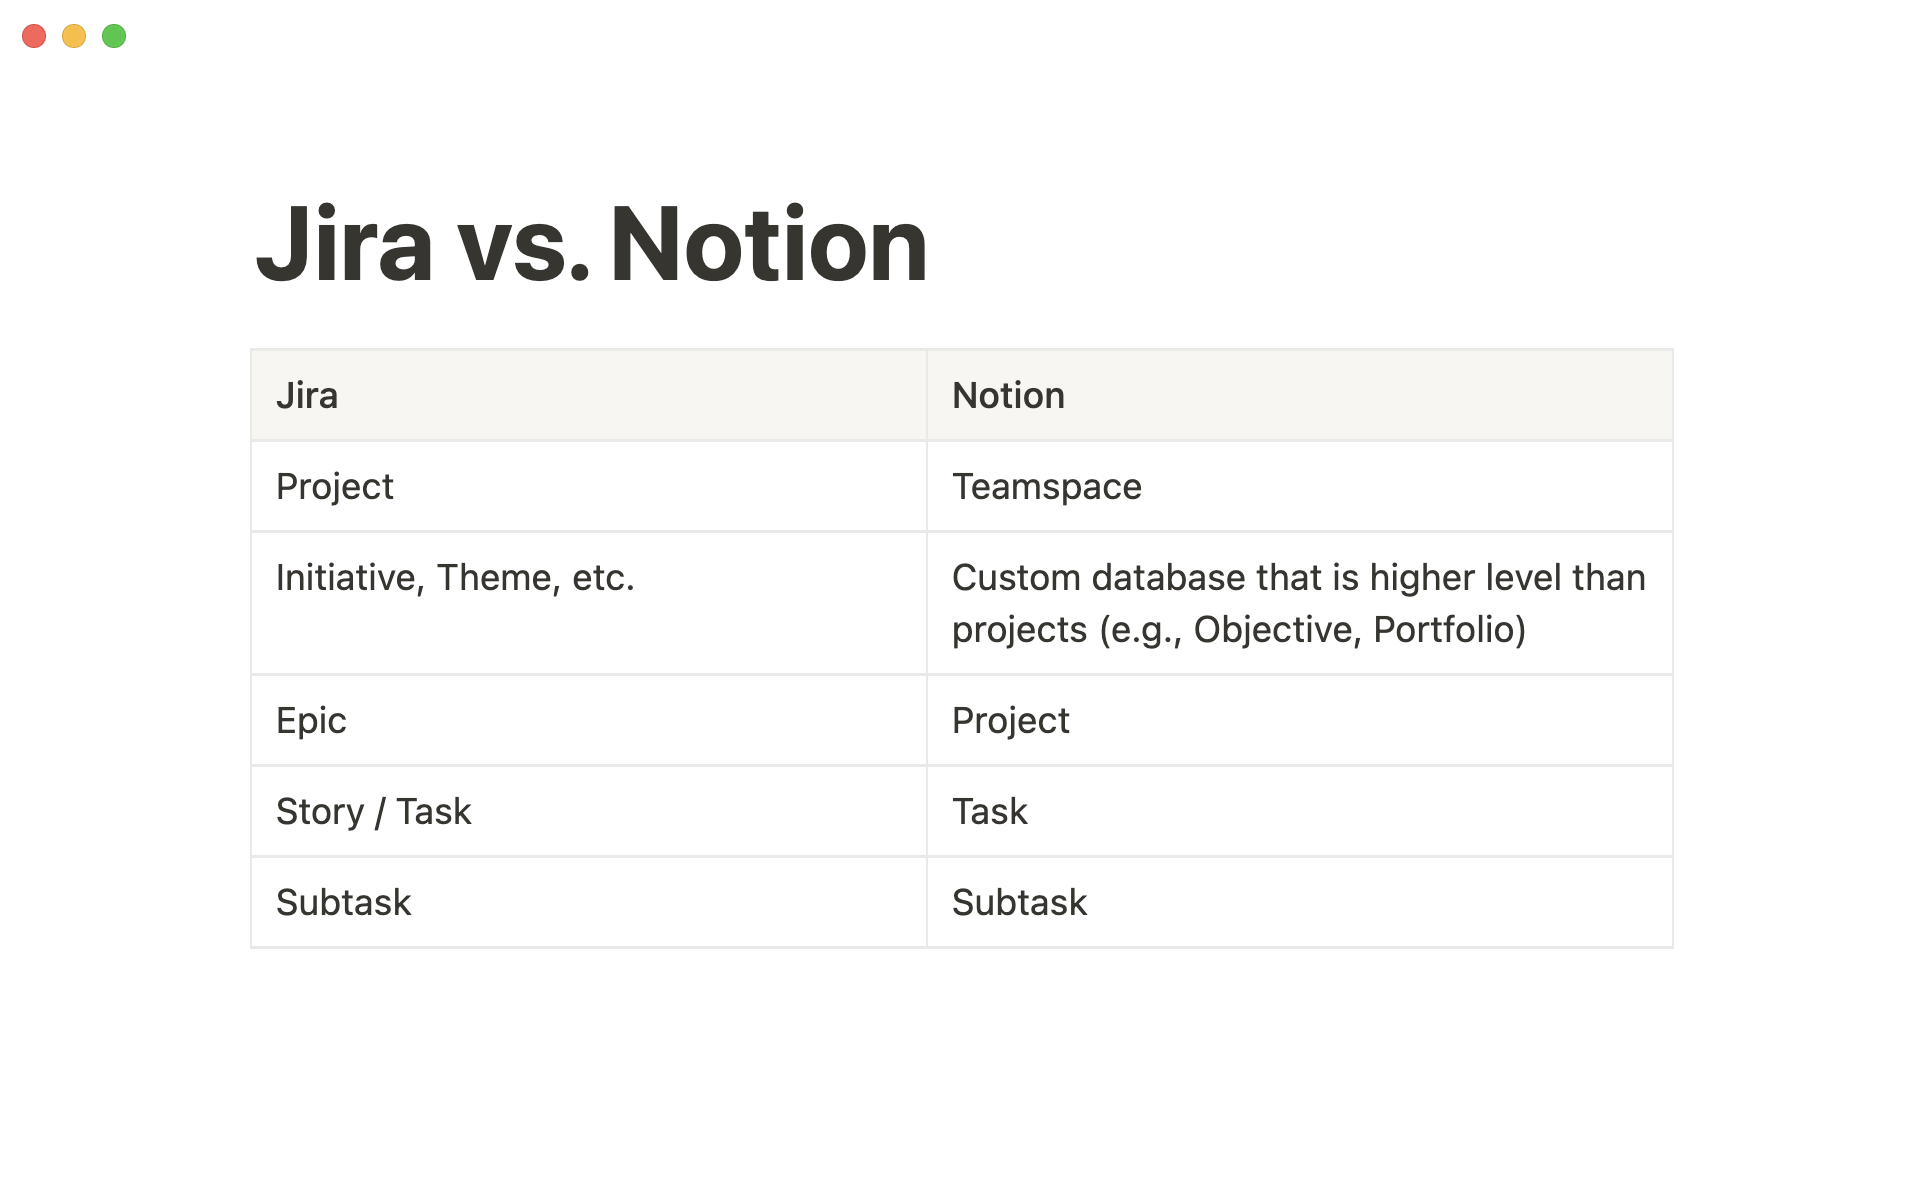 Here's how Jira translates into Notion.